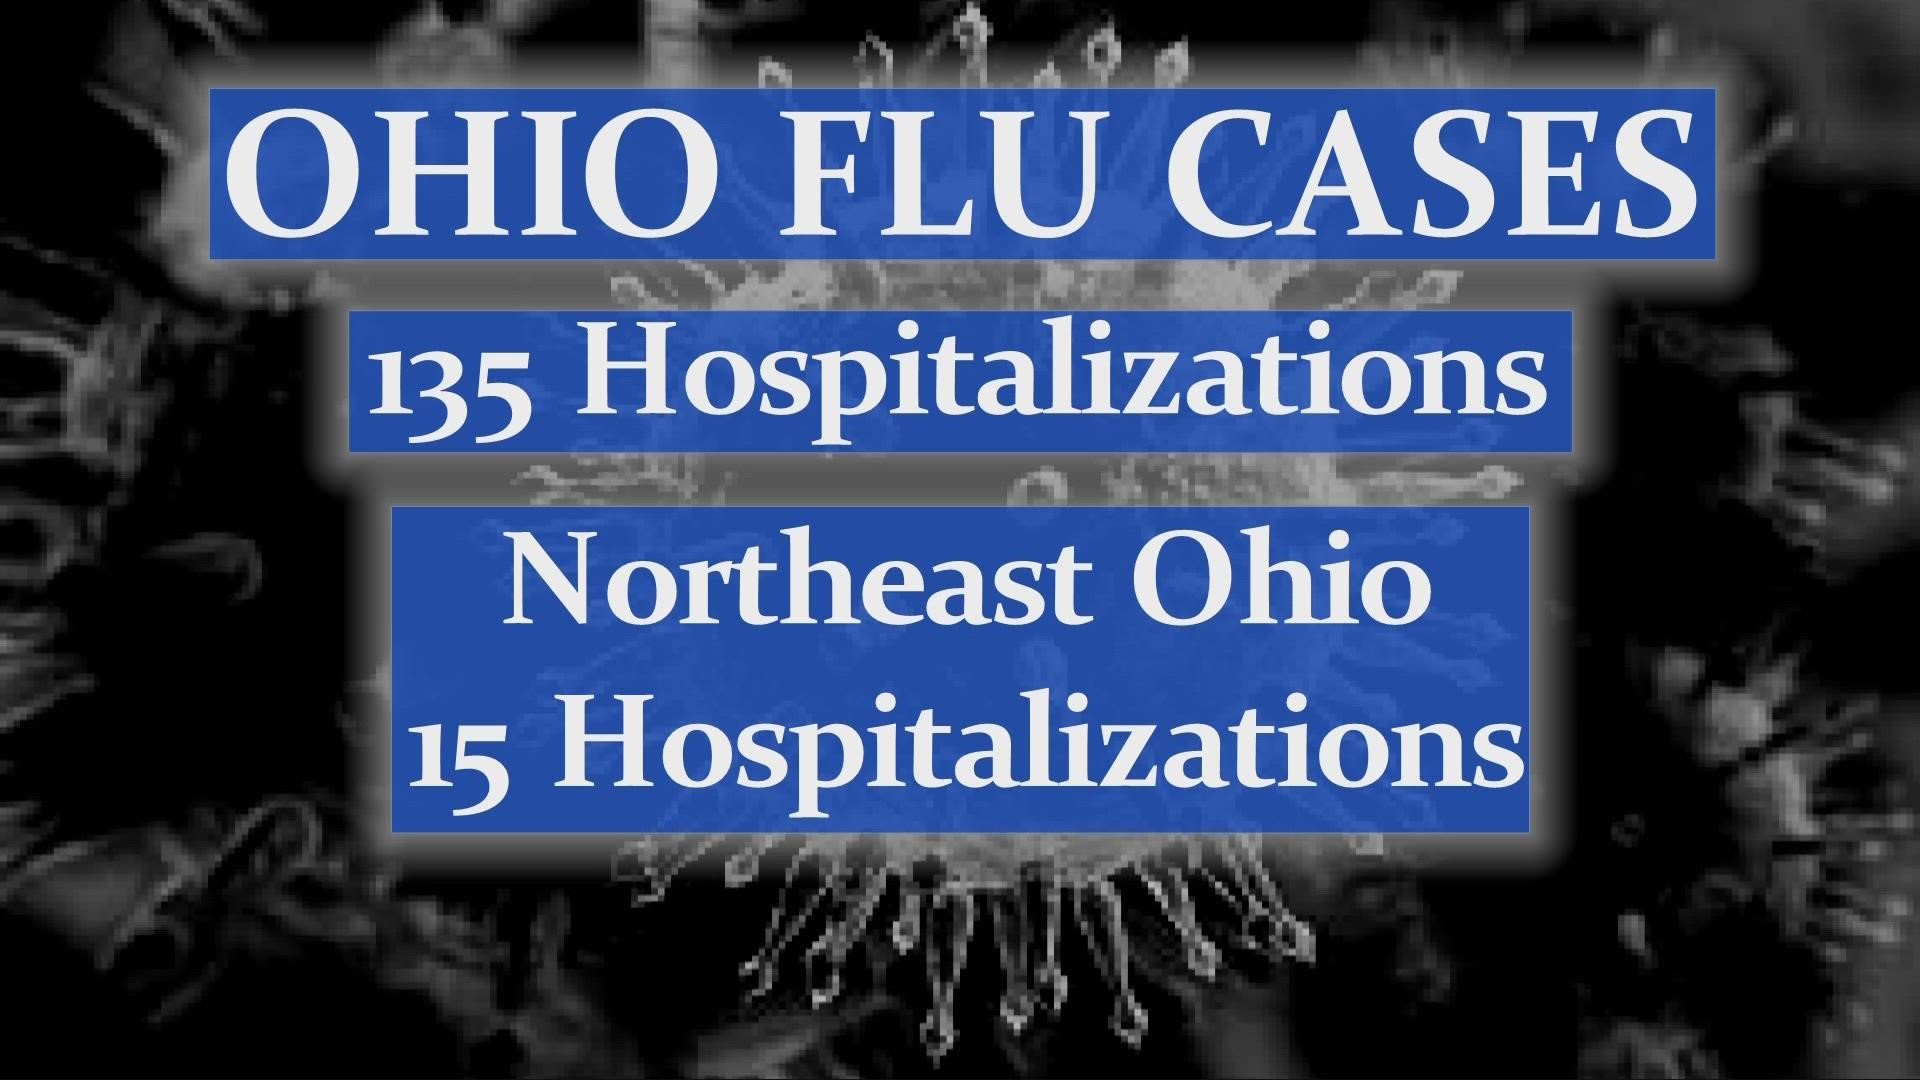 So far this season, the state has had 135 flu-related hospitalizations, including 15 in Northeast Ohio.